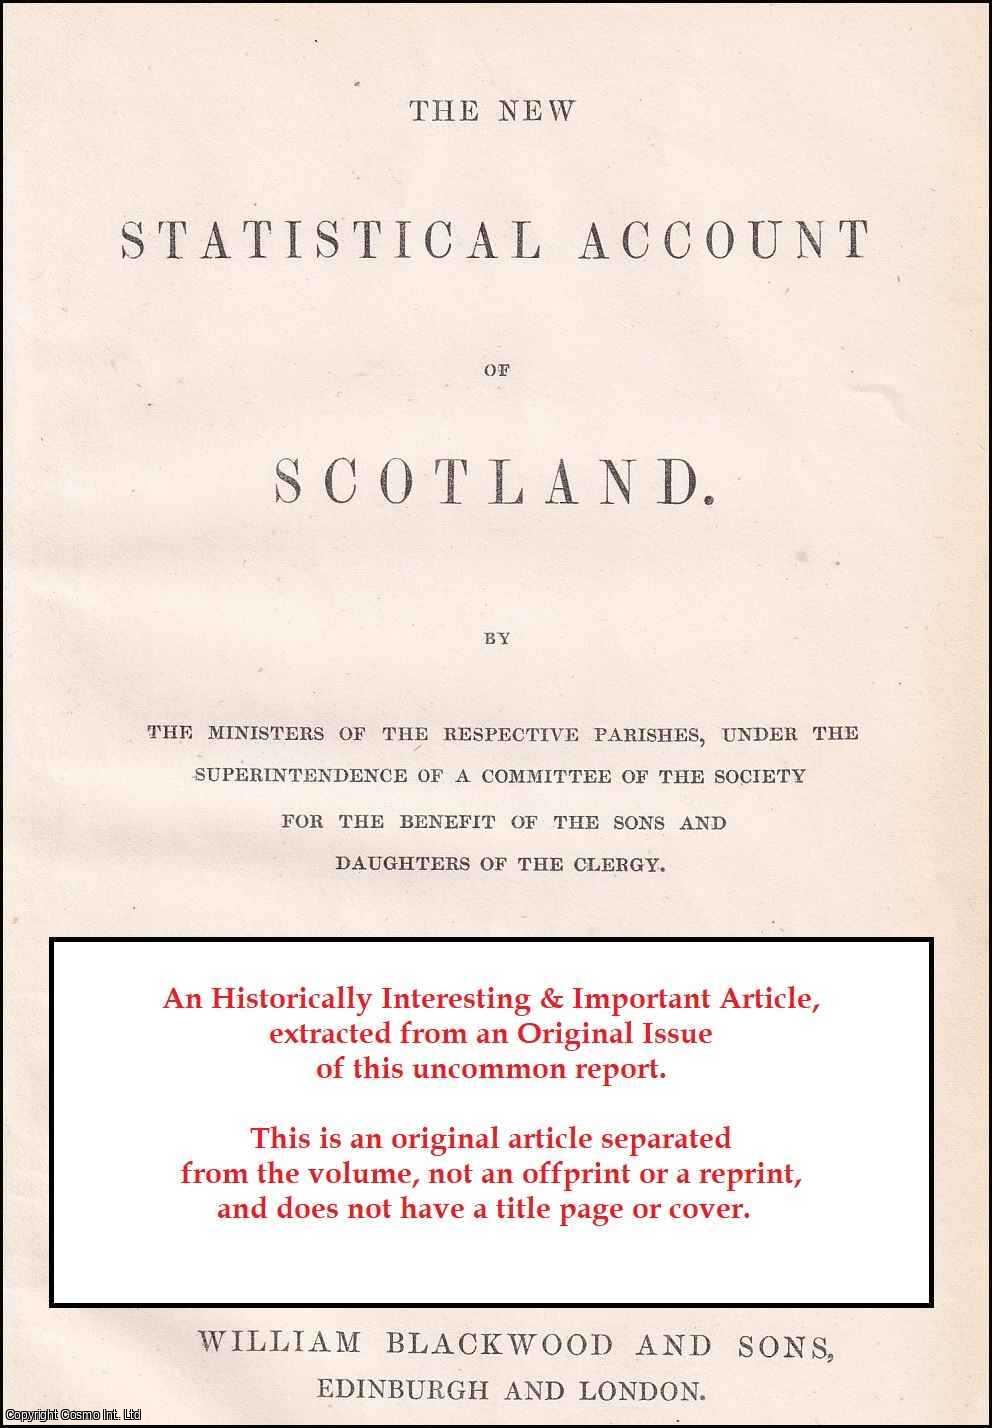 Rev. Thomas Barclay - Parish of Currie. Presbytery of Edinburgh, Synod of Lothian and Tweeddale. An uncommon original article from The New Statistical Account of Scotland, 1845.